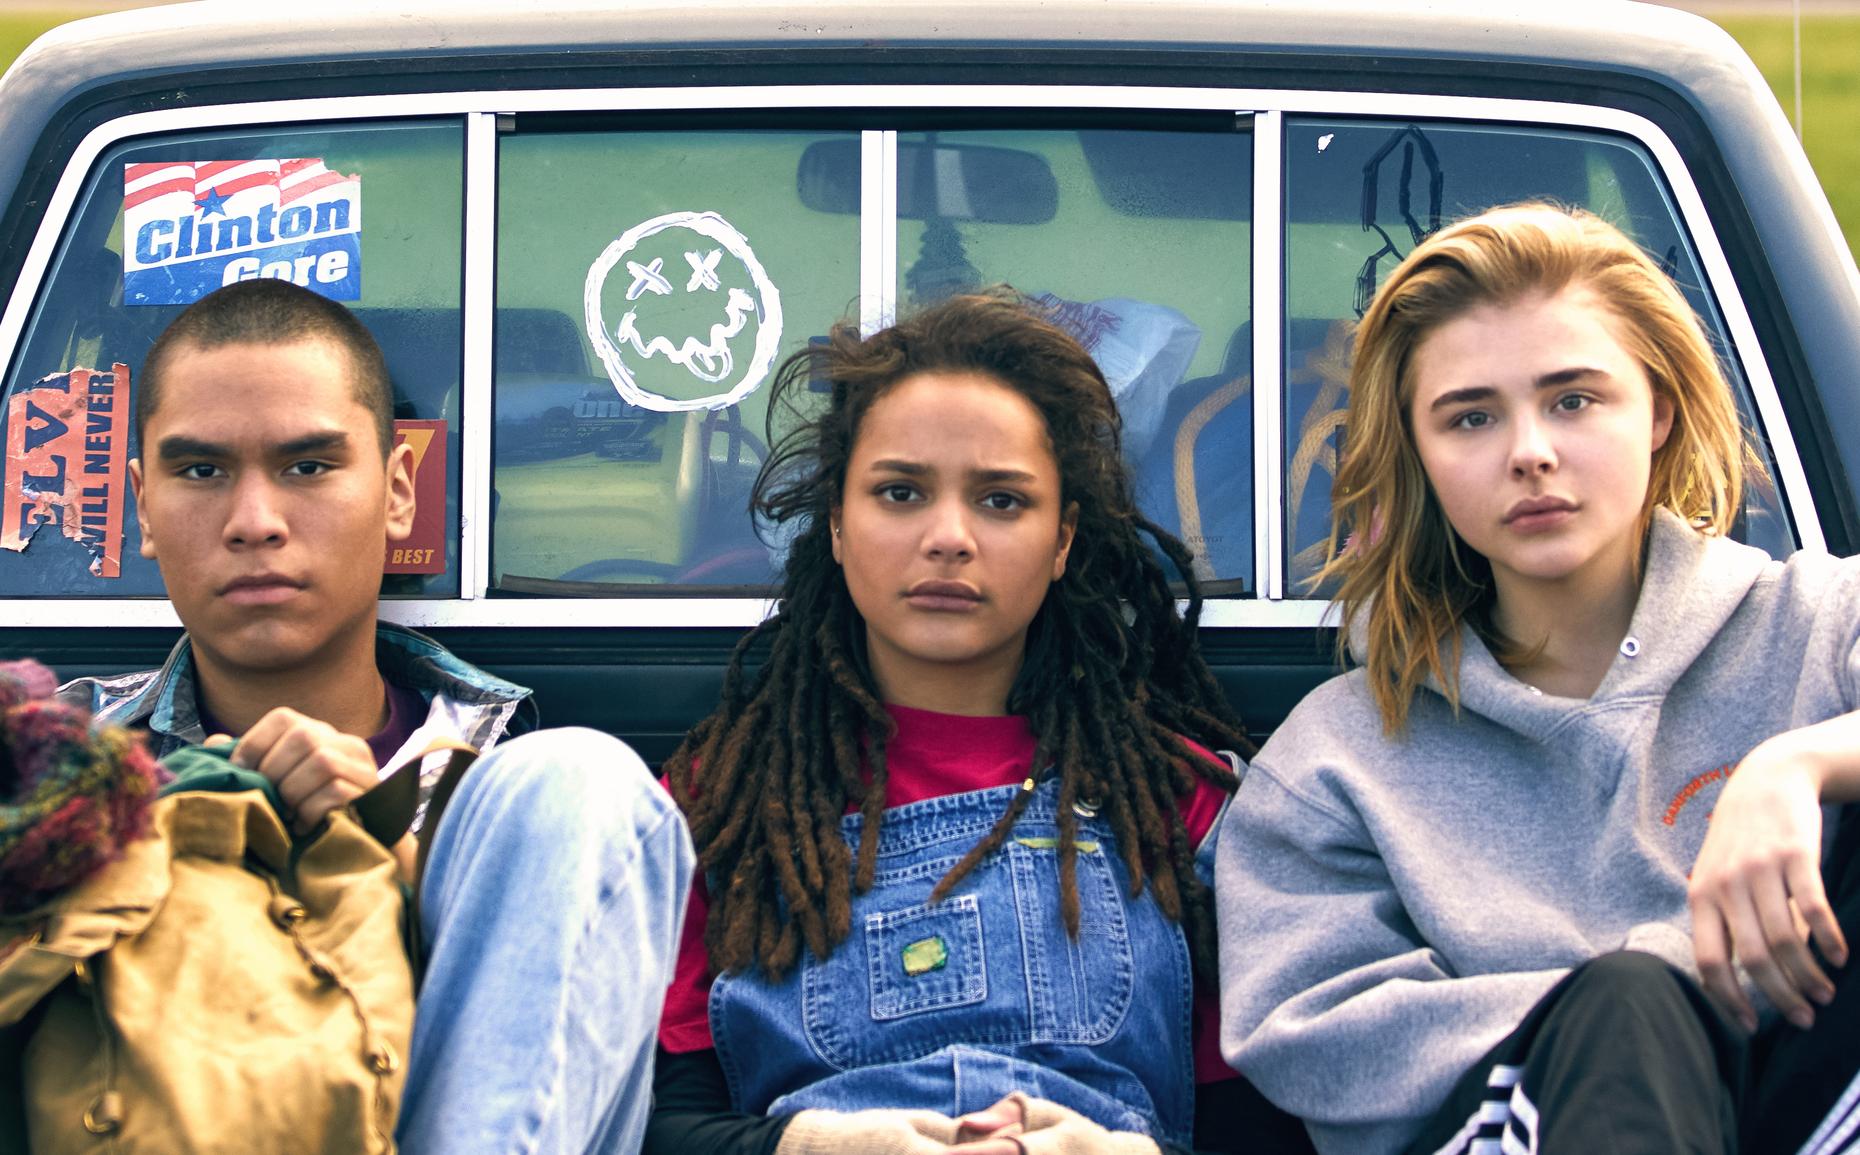 Talk Back of ‘The Miseducation of Cameron Post’